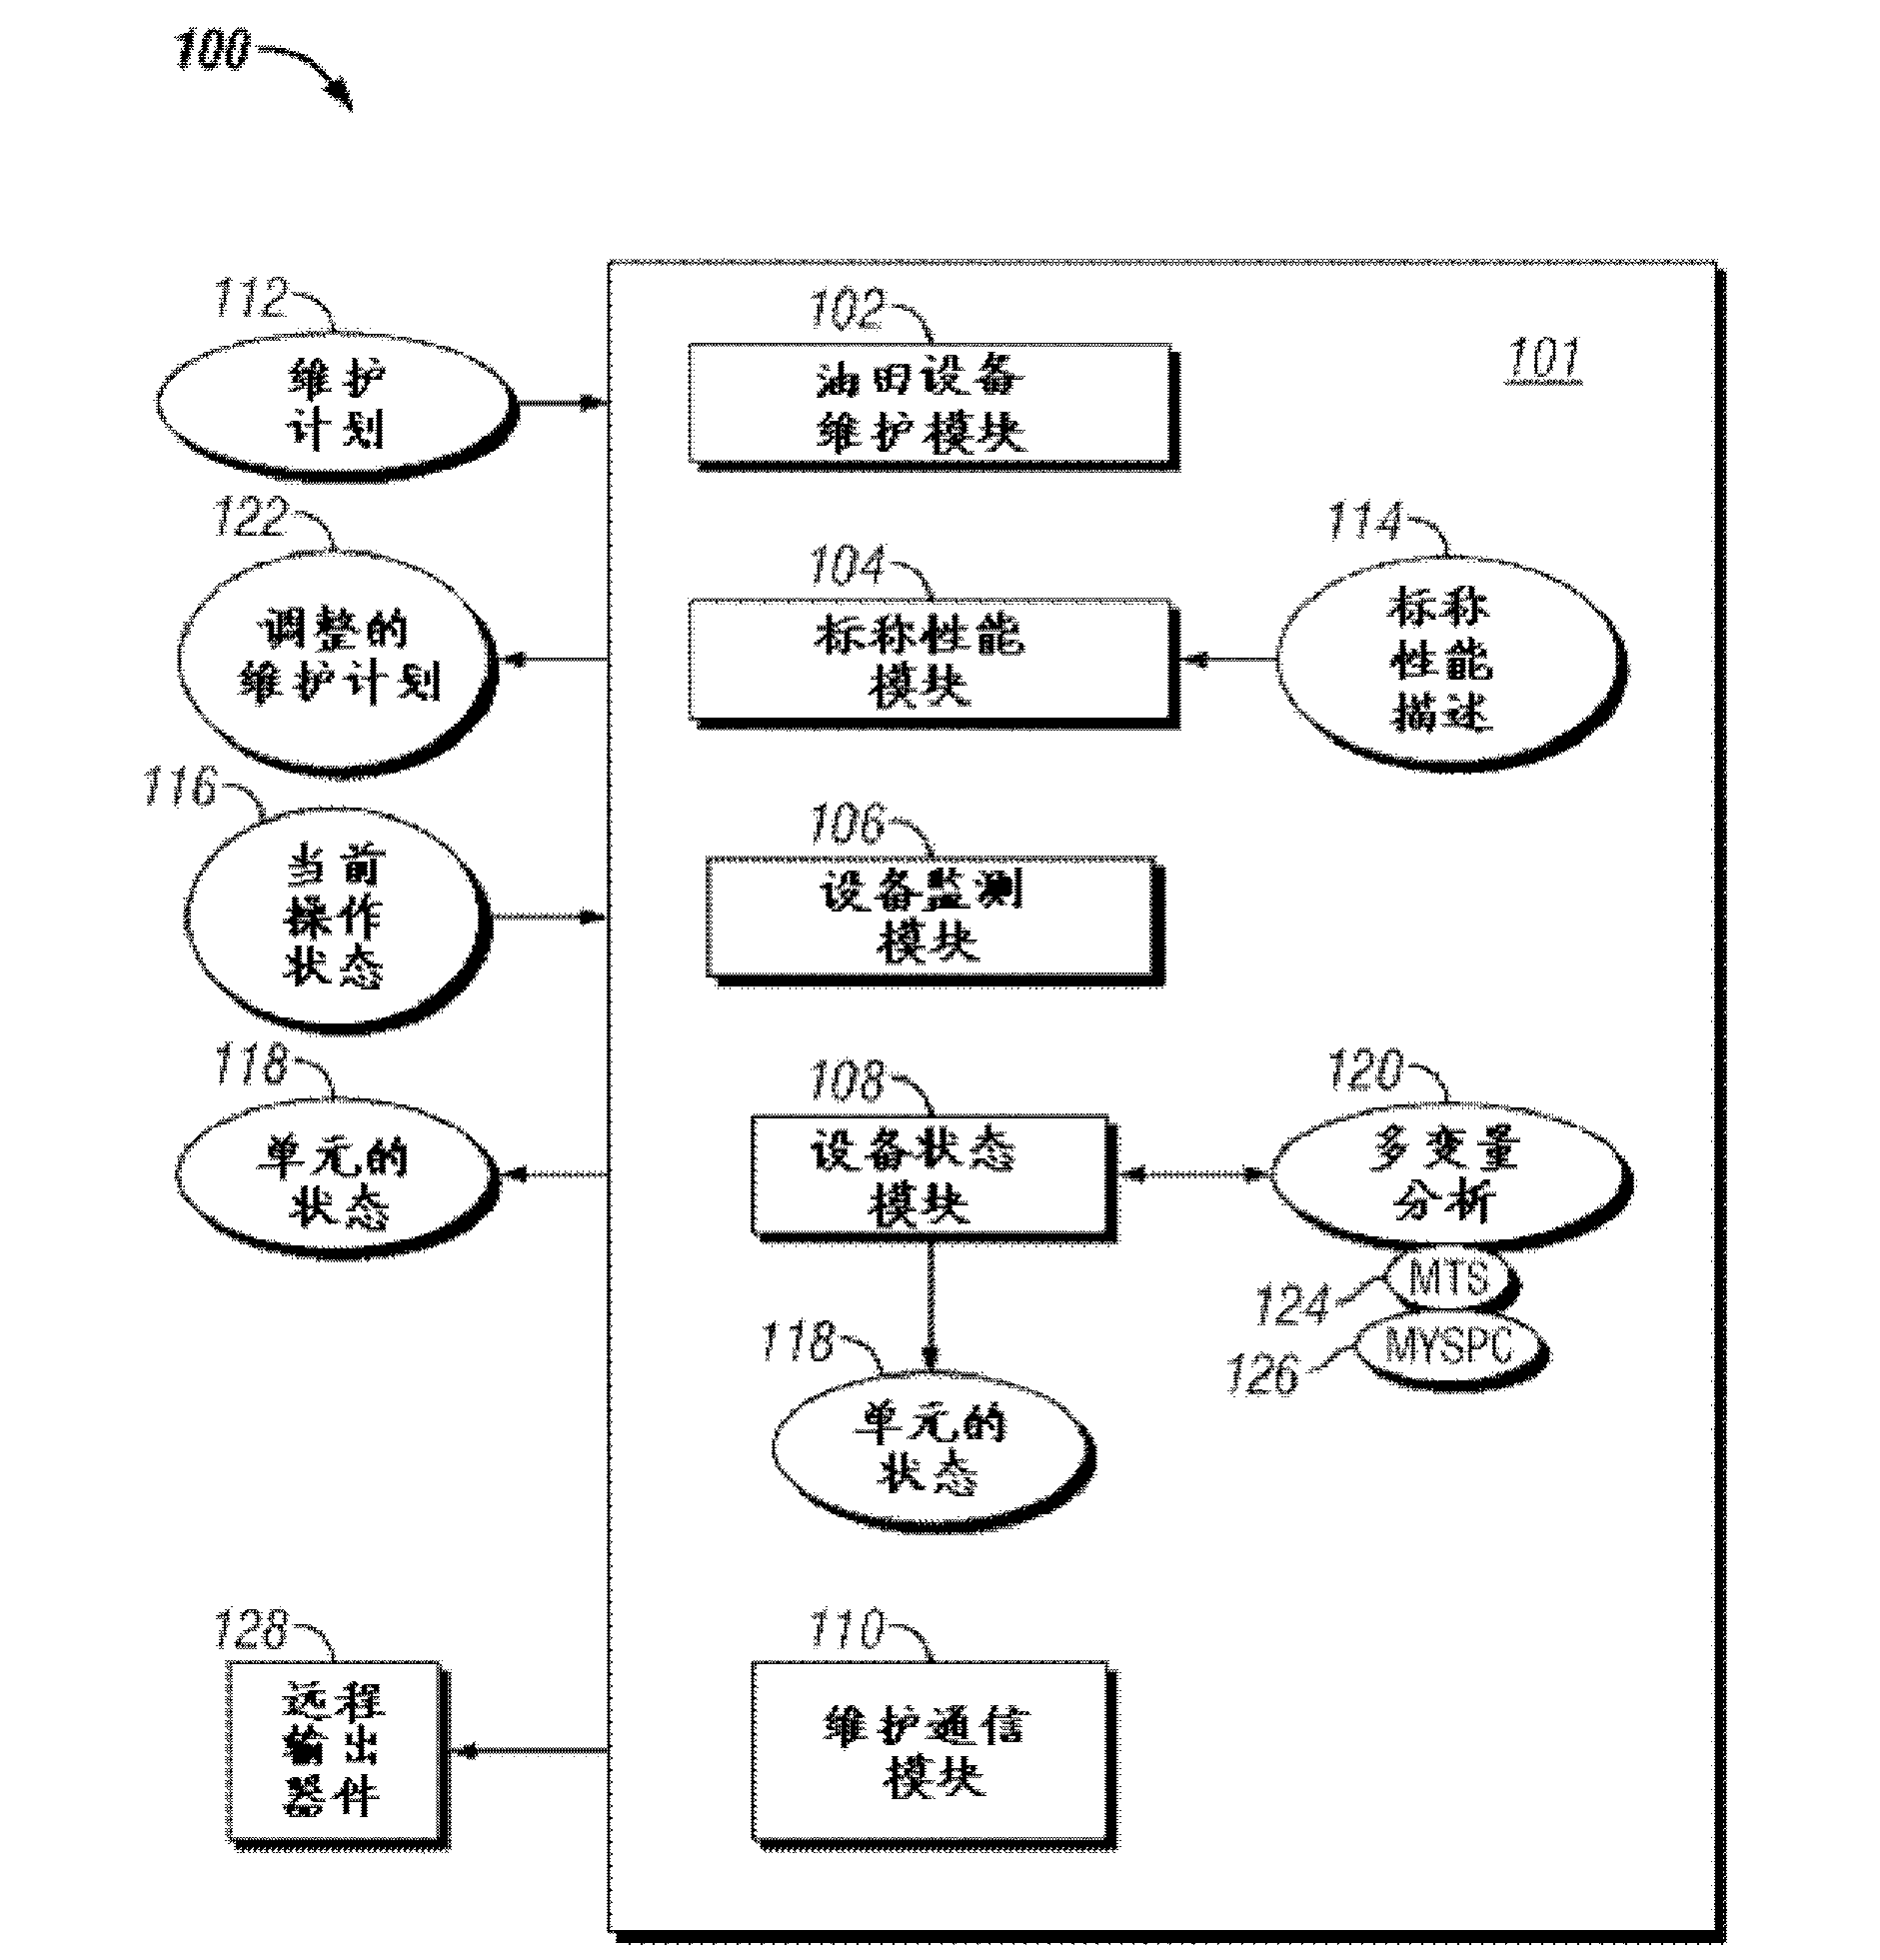 System, method, and apparatus for oilfield equipment prognostics and health management